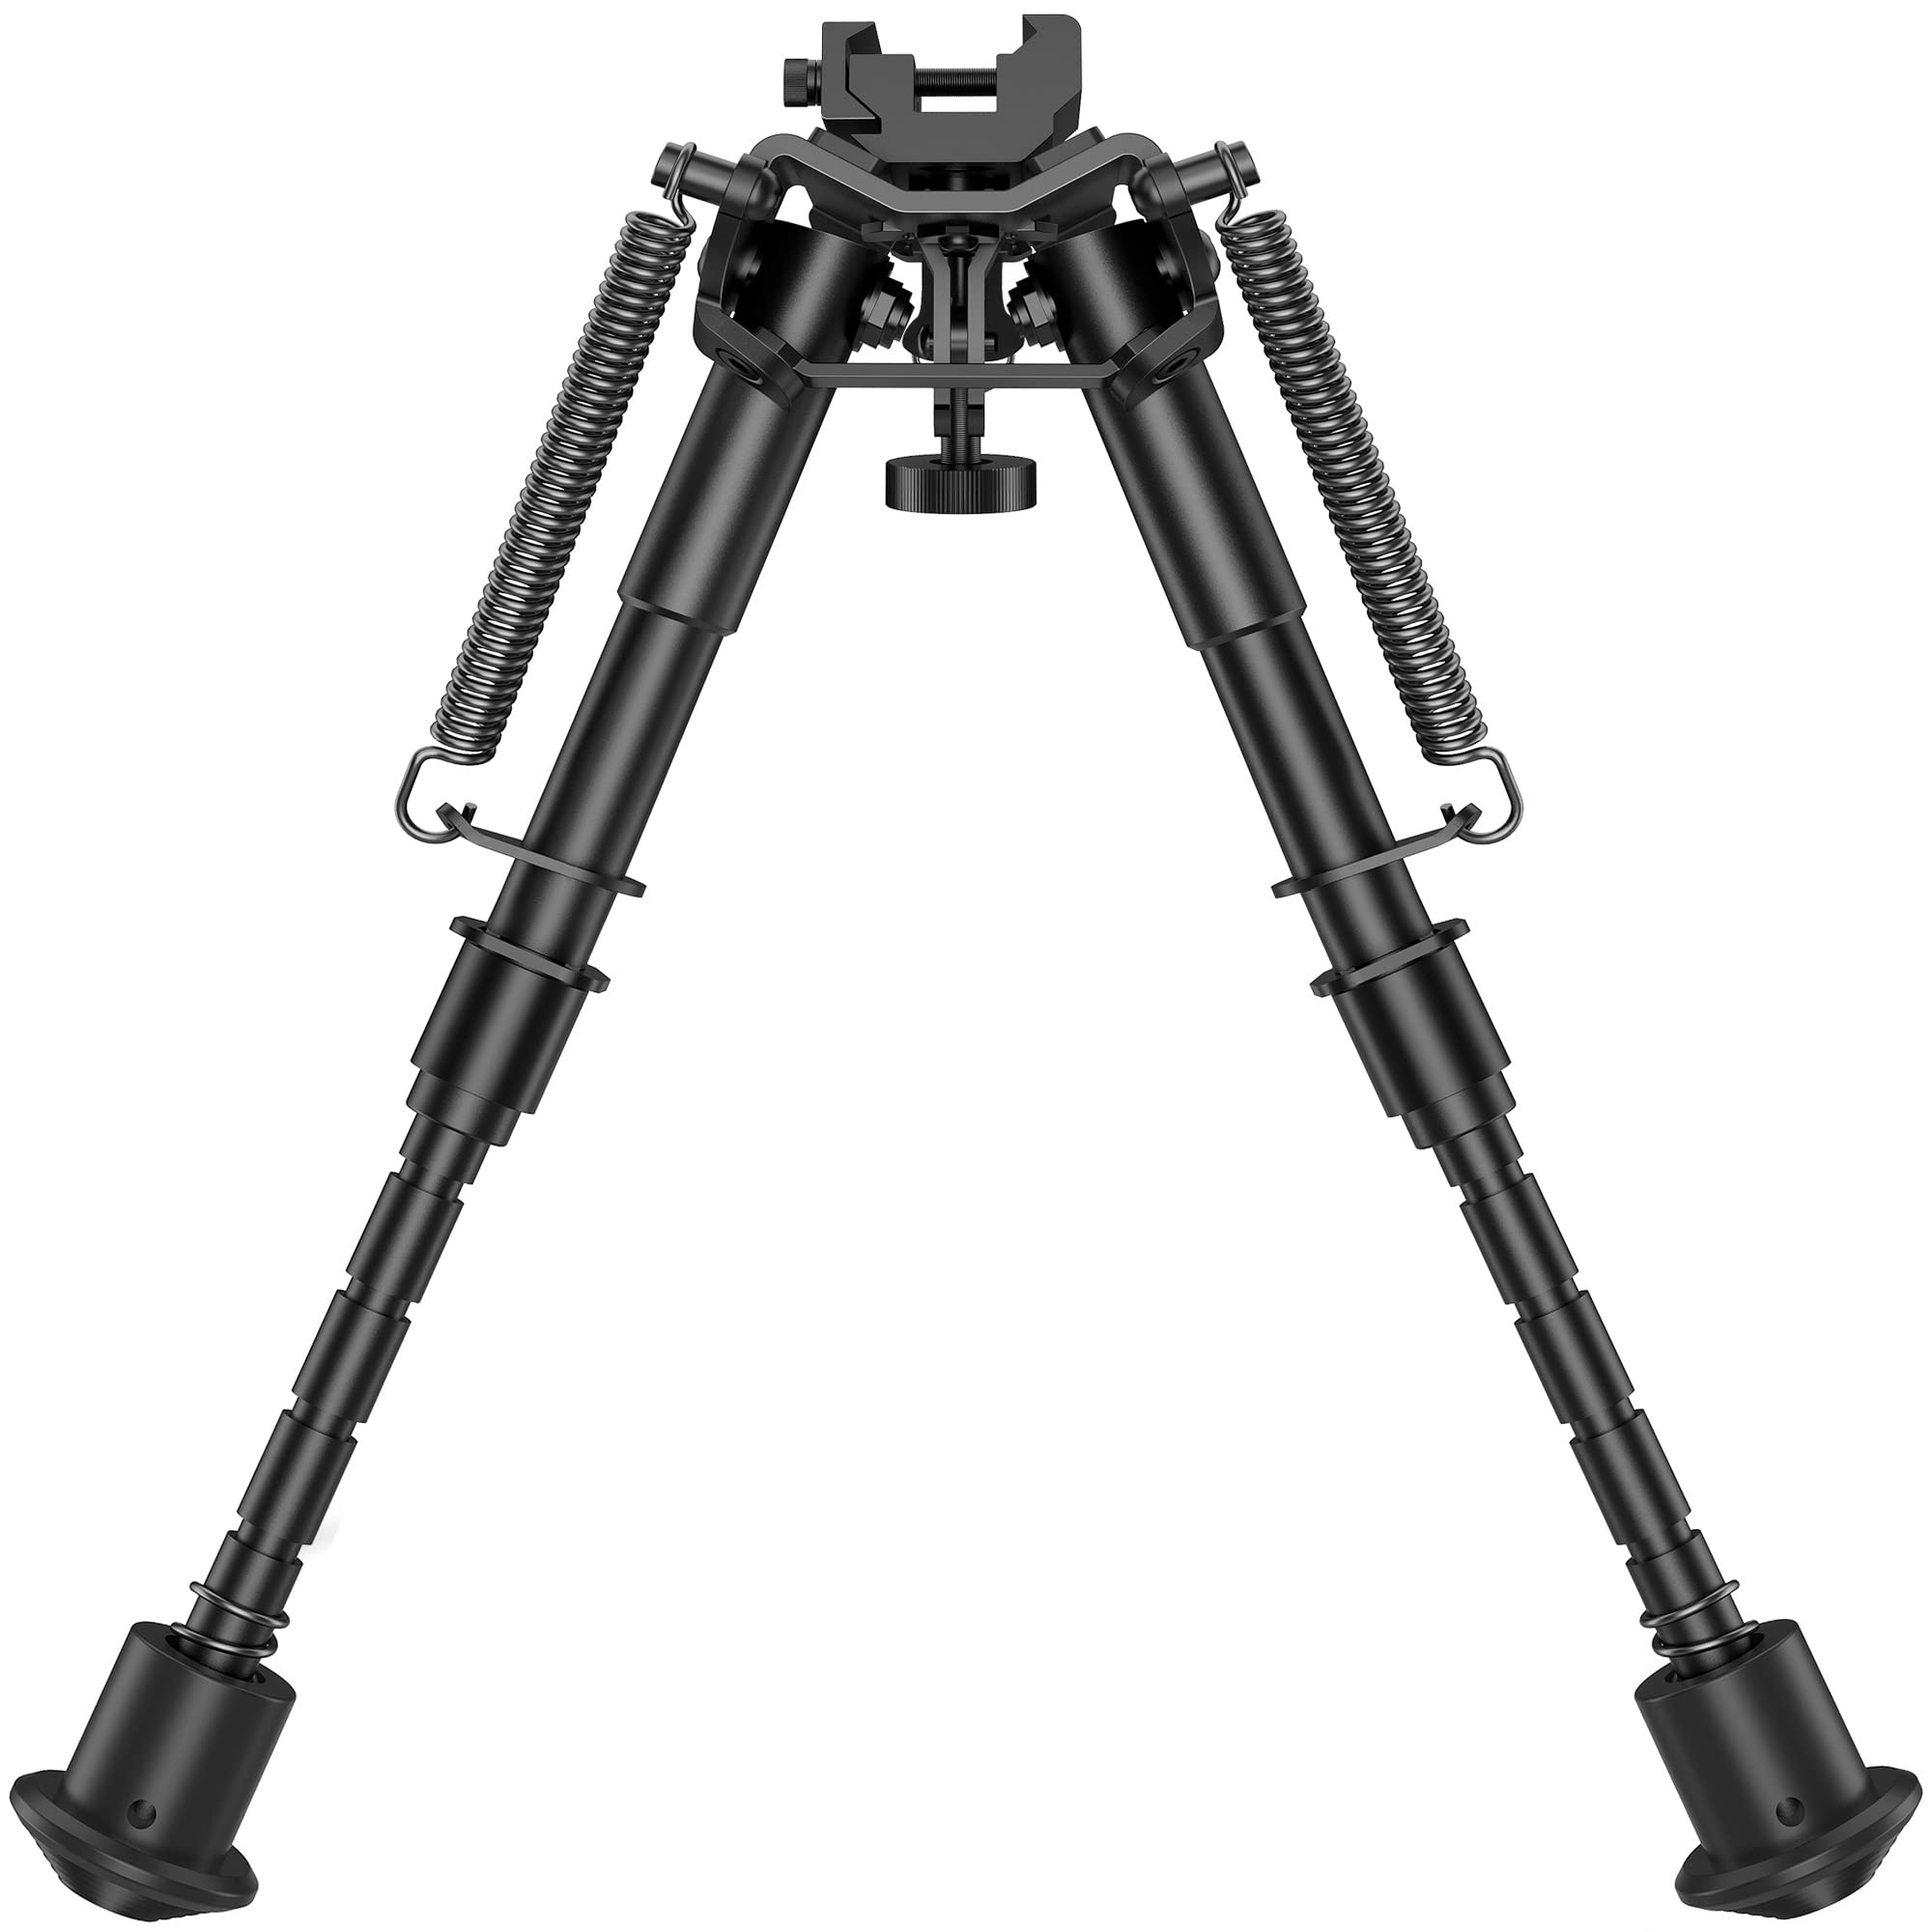 CVLIFE 6-9 Inches Bipod Picatinny Bipod with Adapter